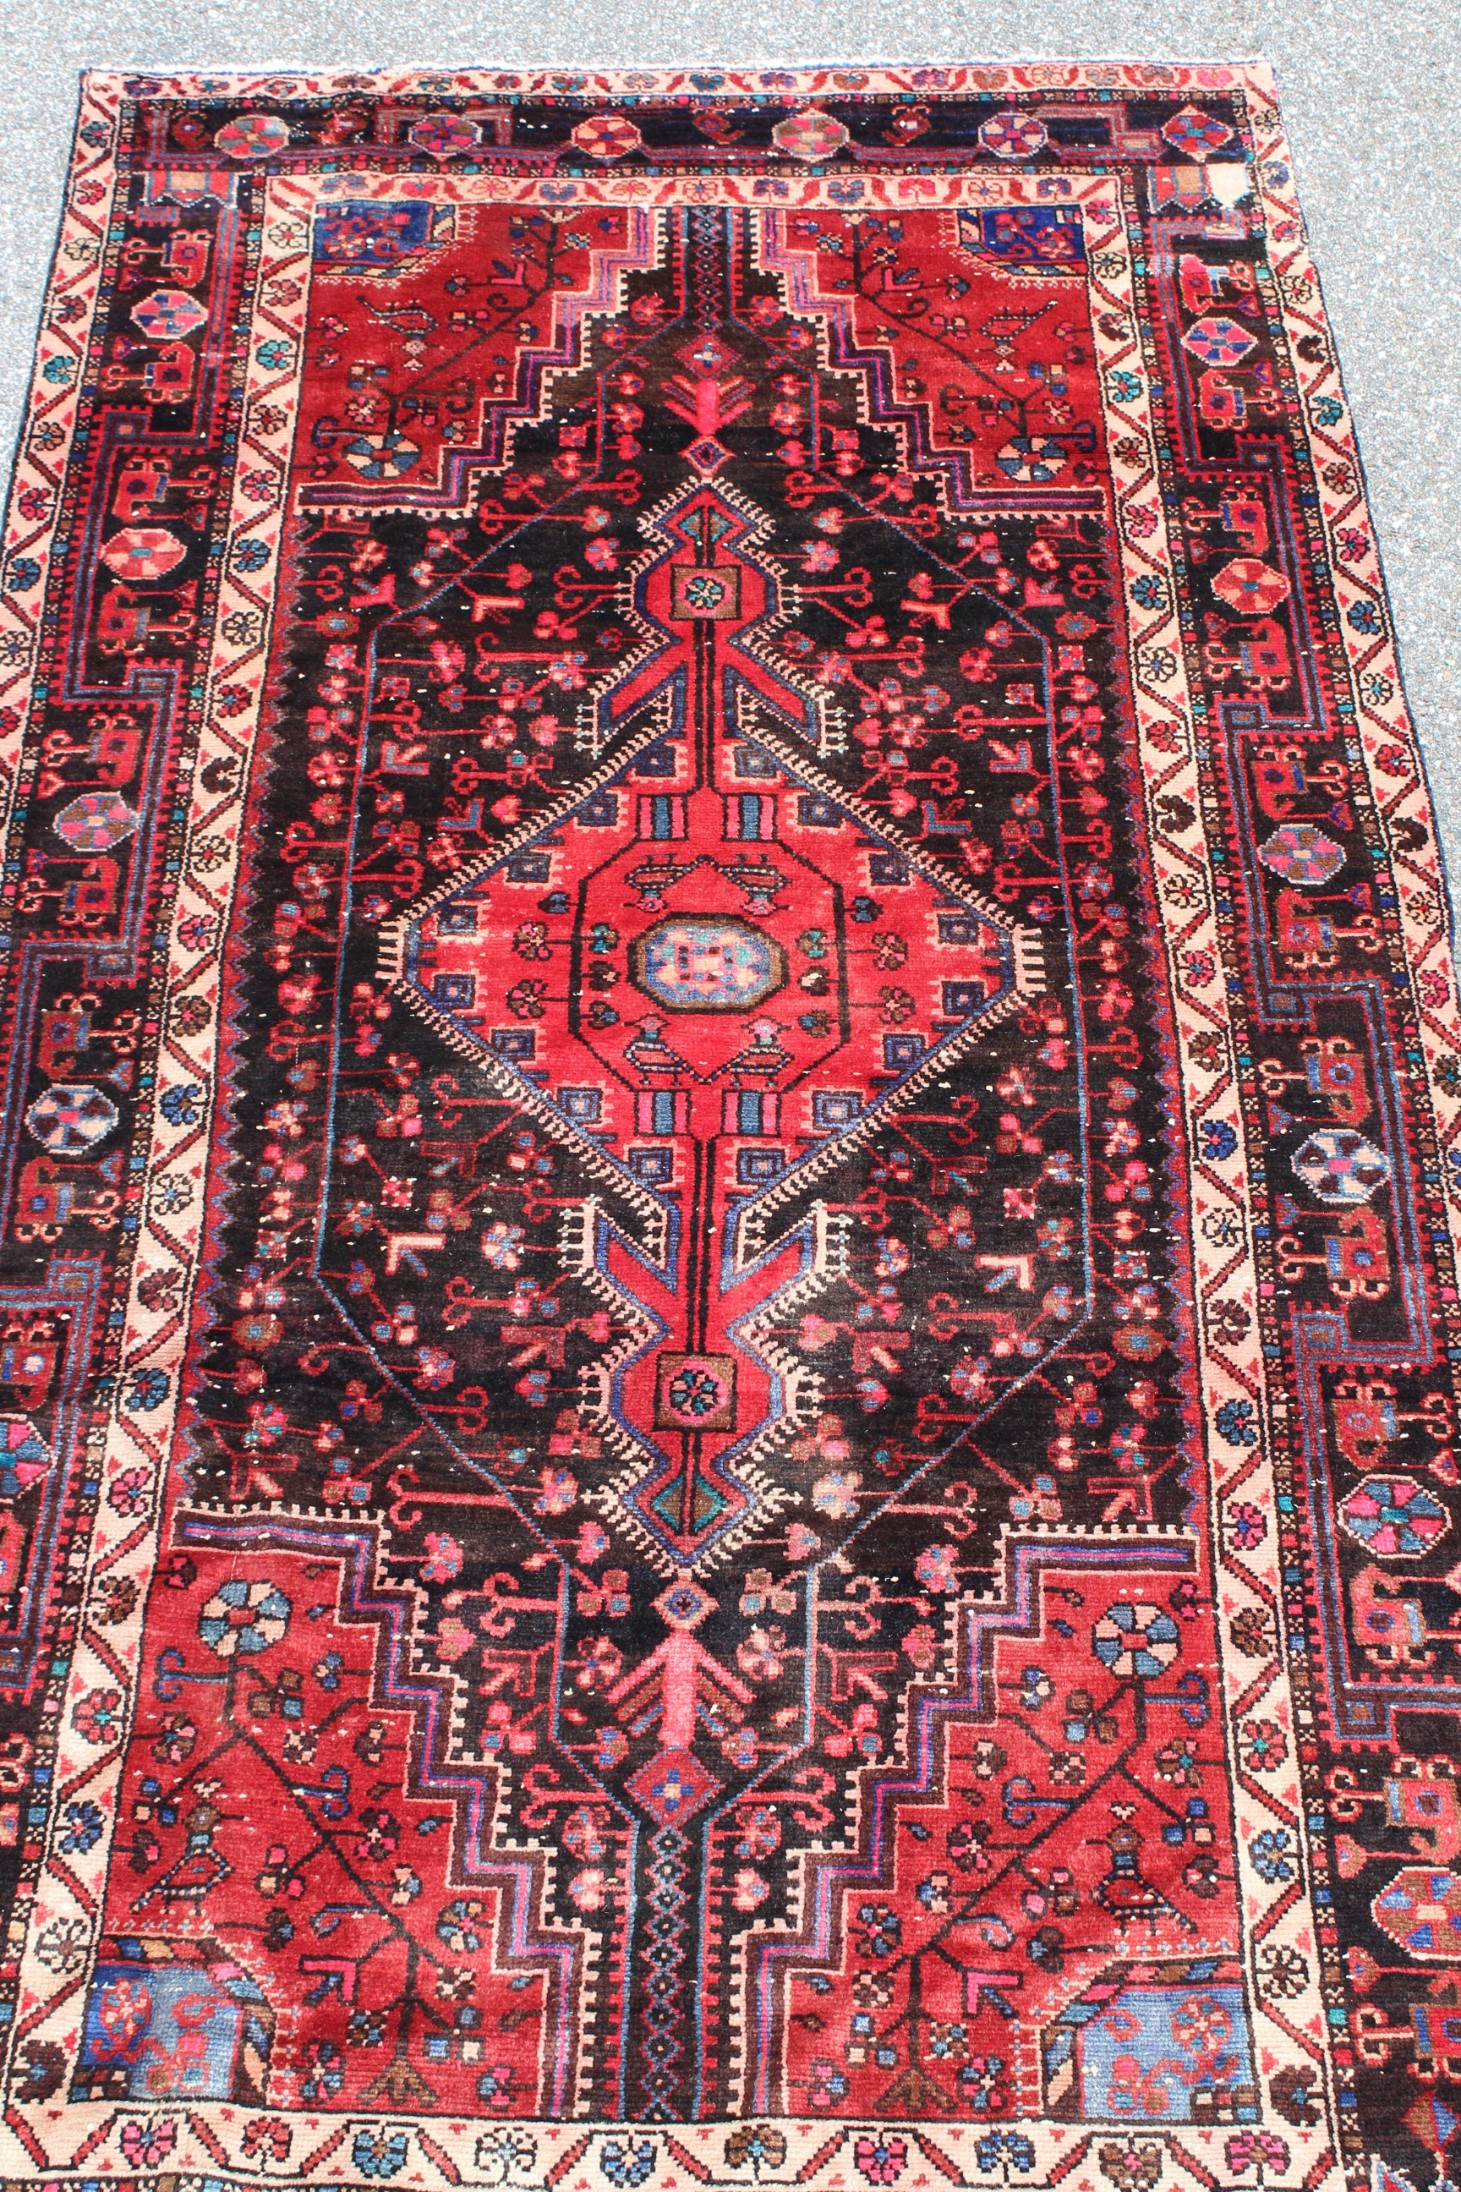 Sherivan Hand-Knotted Persian Wool Rug - 5' x 9'6" - Image 2 of 11